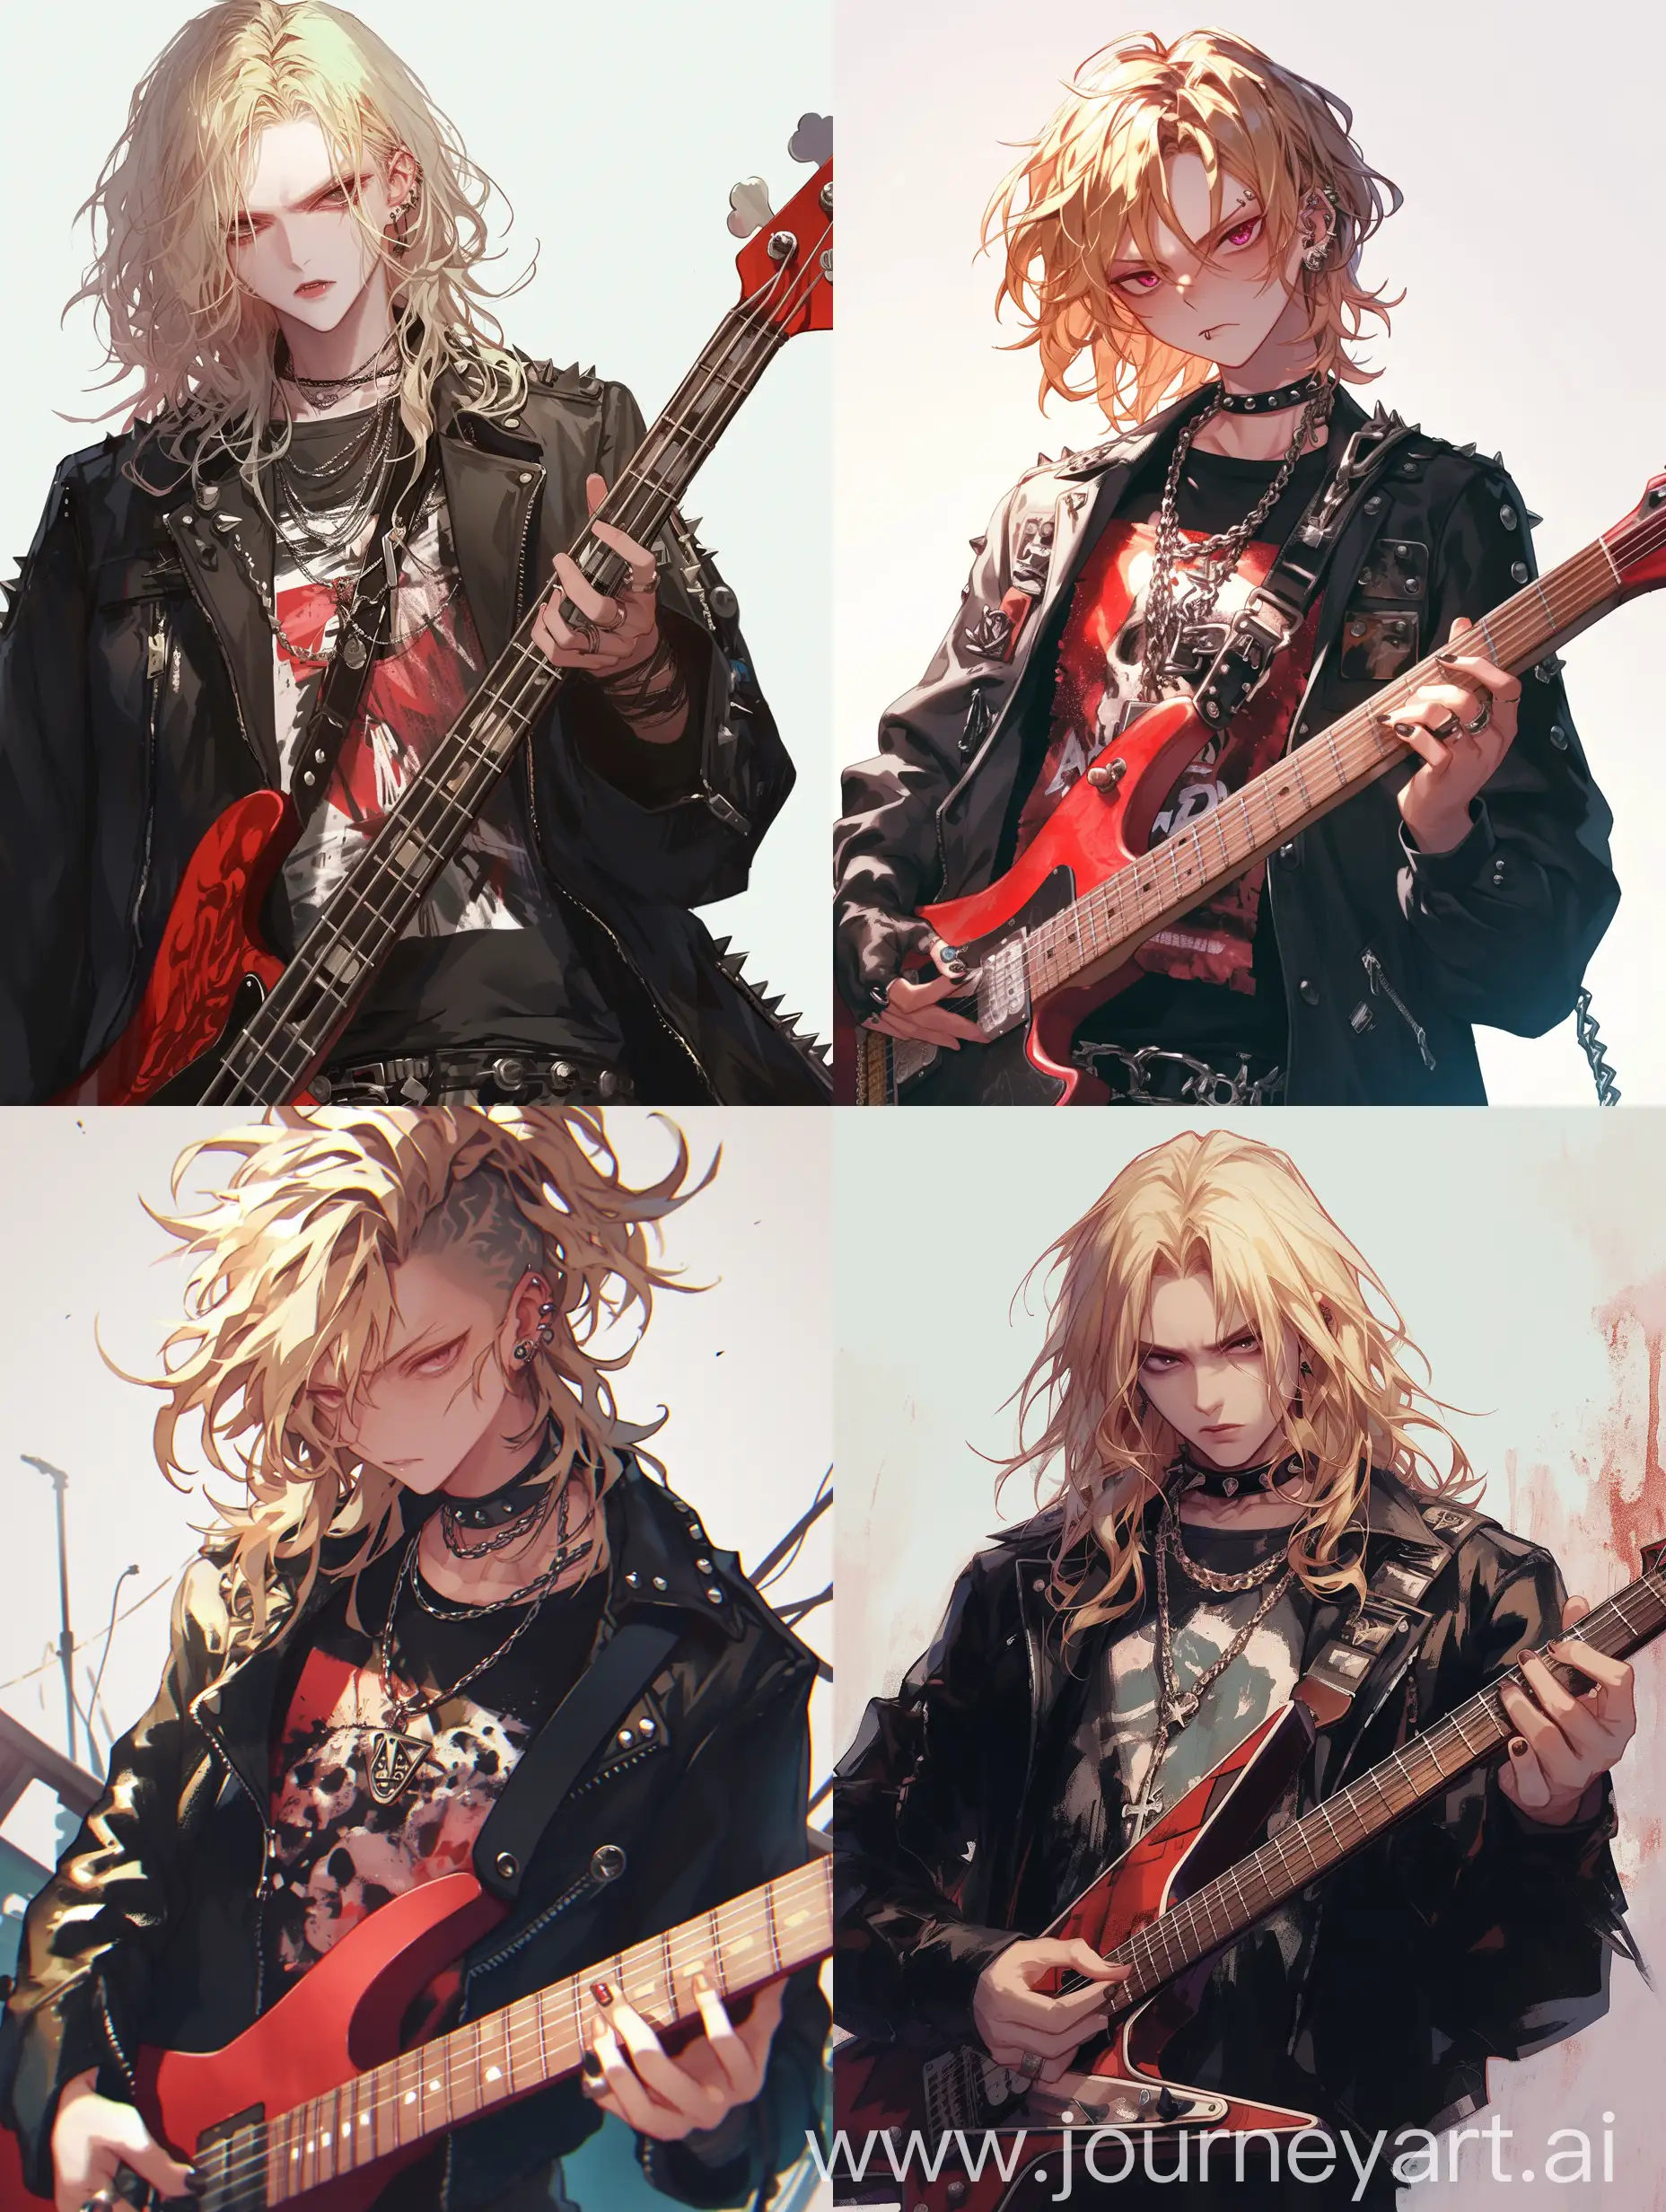 Serious-Blond-Guitarist-in-Punk-Outfit-Holding-Electric-Guitar